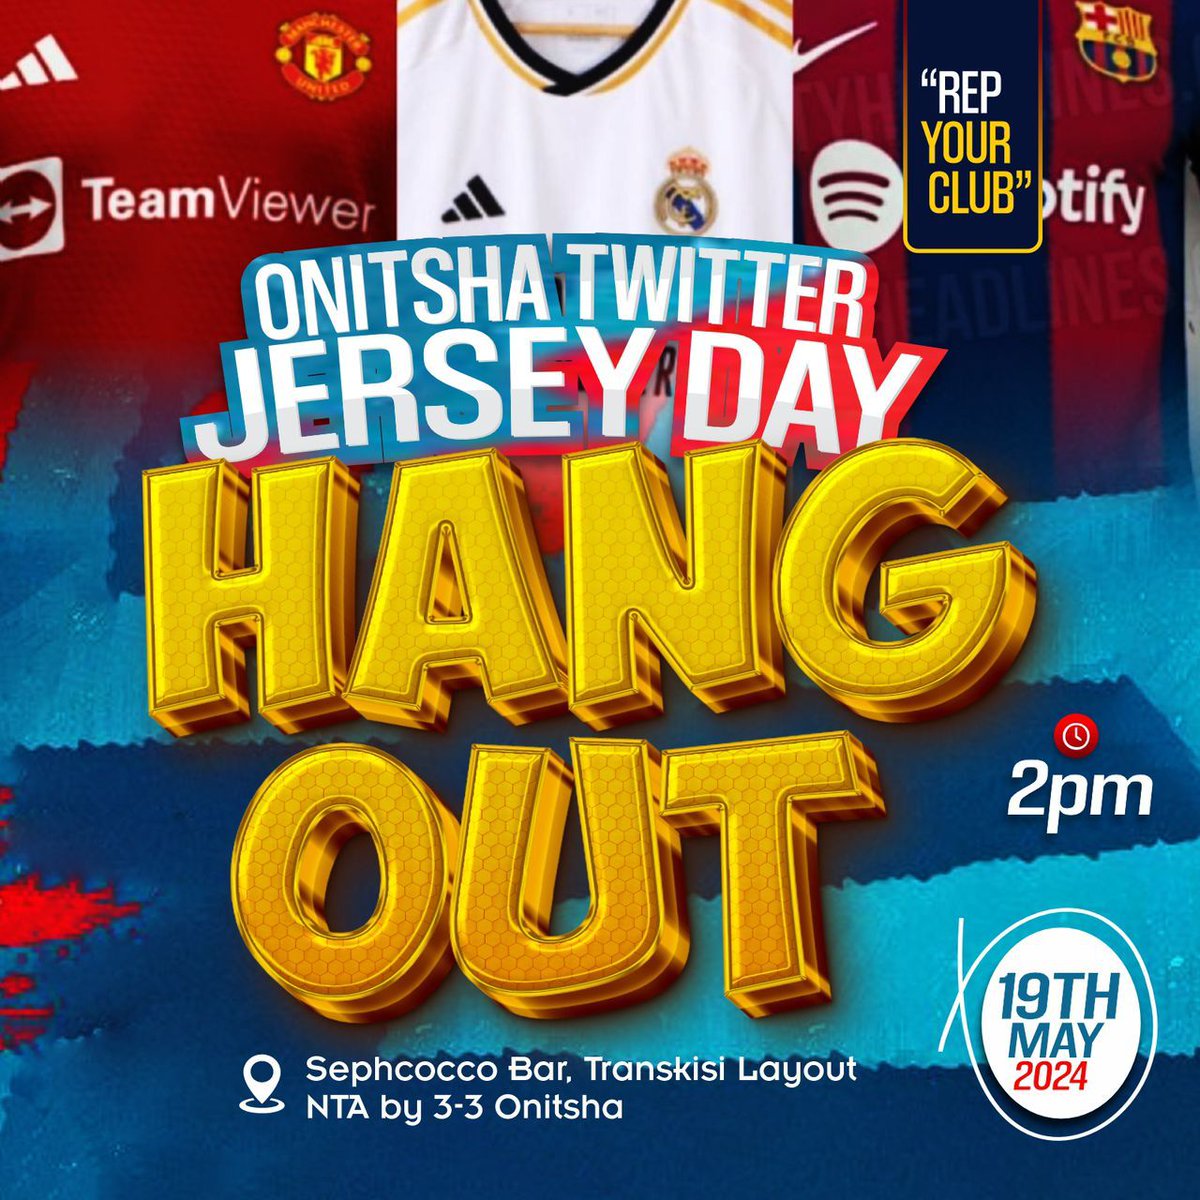 It's exactly one week to Onitsha jersey hangout and for someone who is not a fan of any club in particular, I should problem wear a jersey that represents all the clubs, yes? I am for everybody☺️.

#OnitshaTwitterJerseyHangout
#OnitshaTwitterCommunity
#RepYourClub